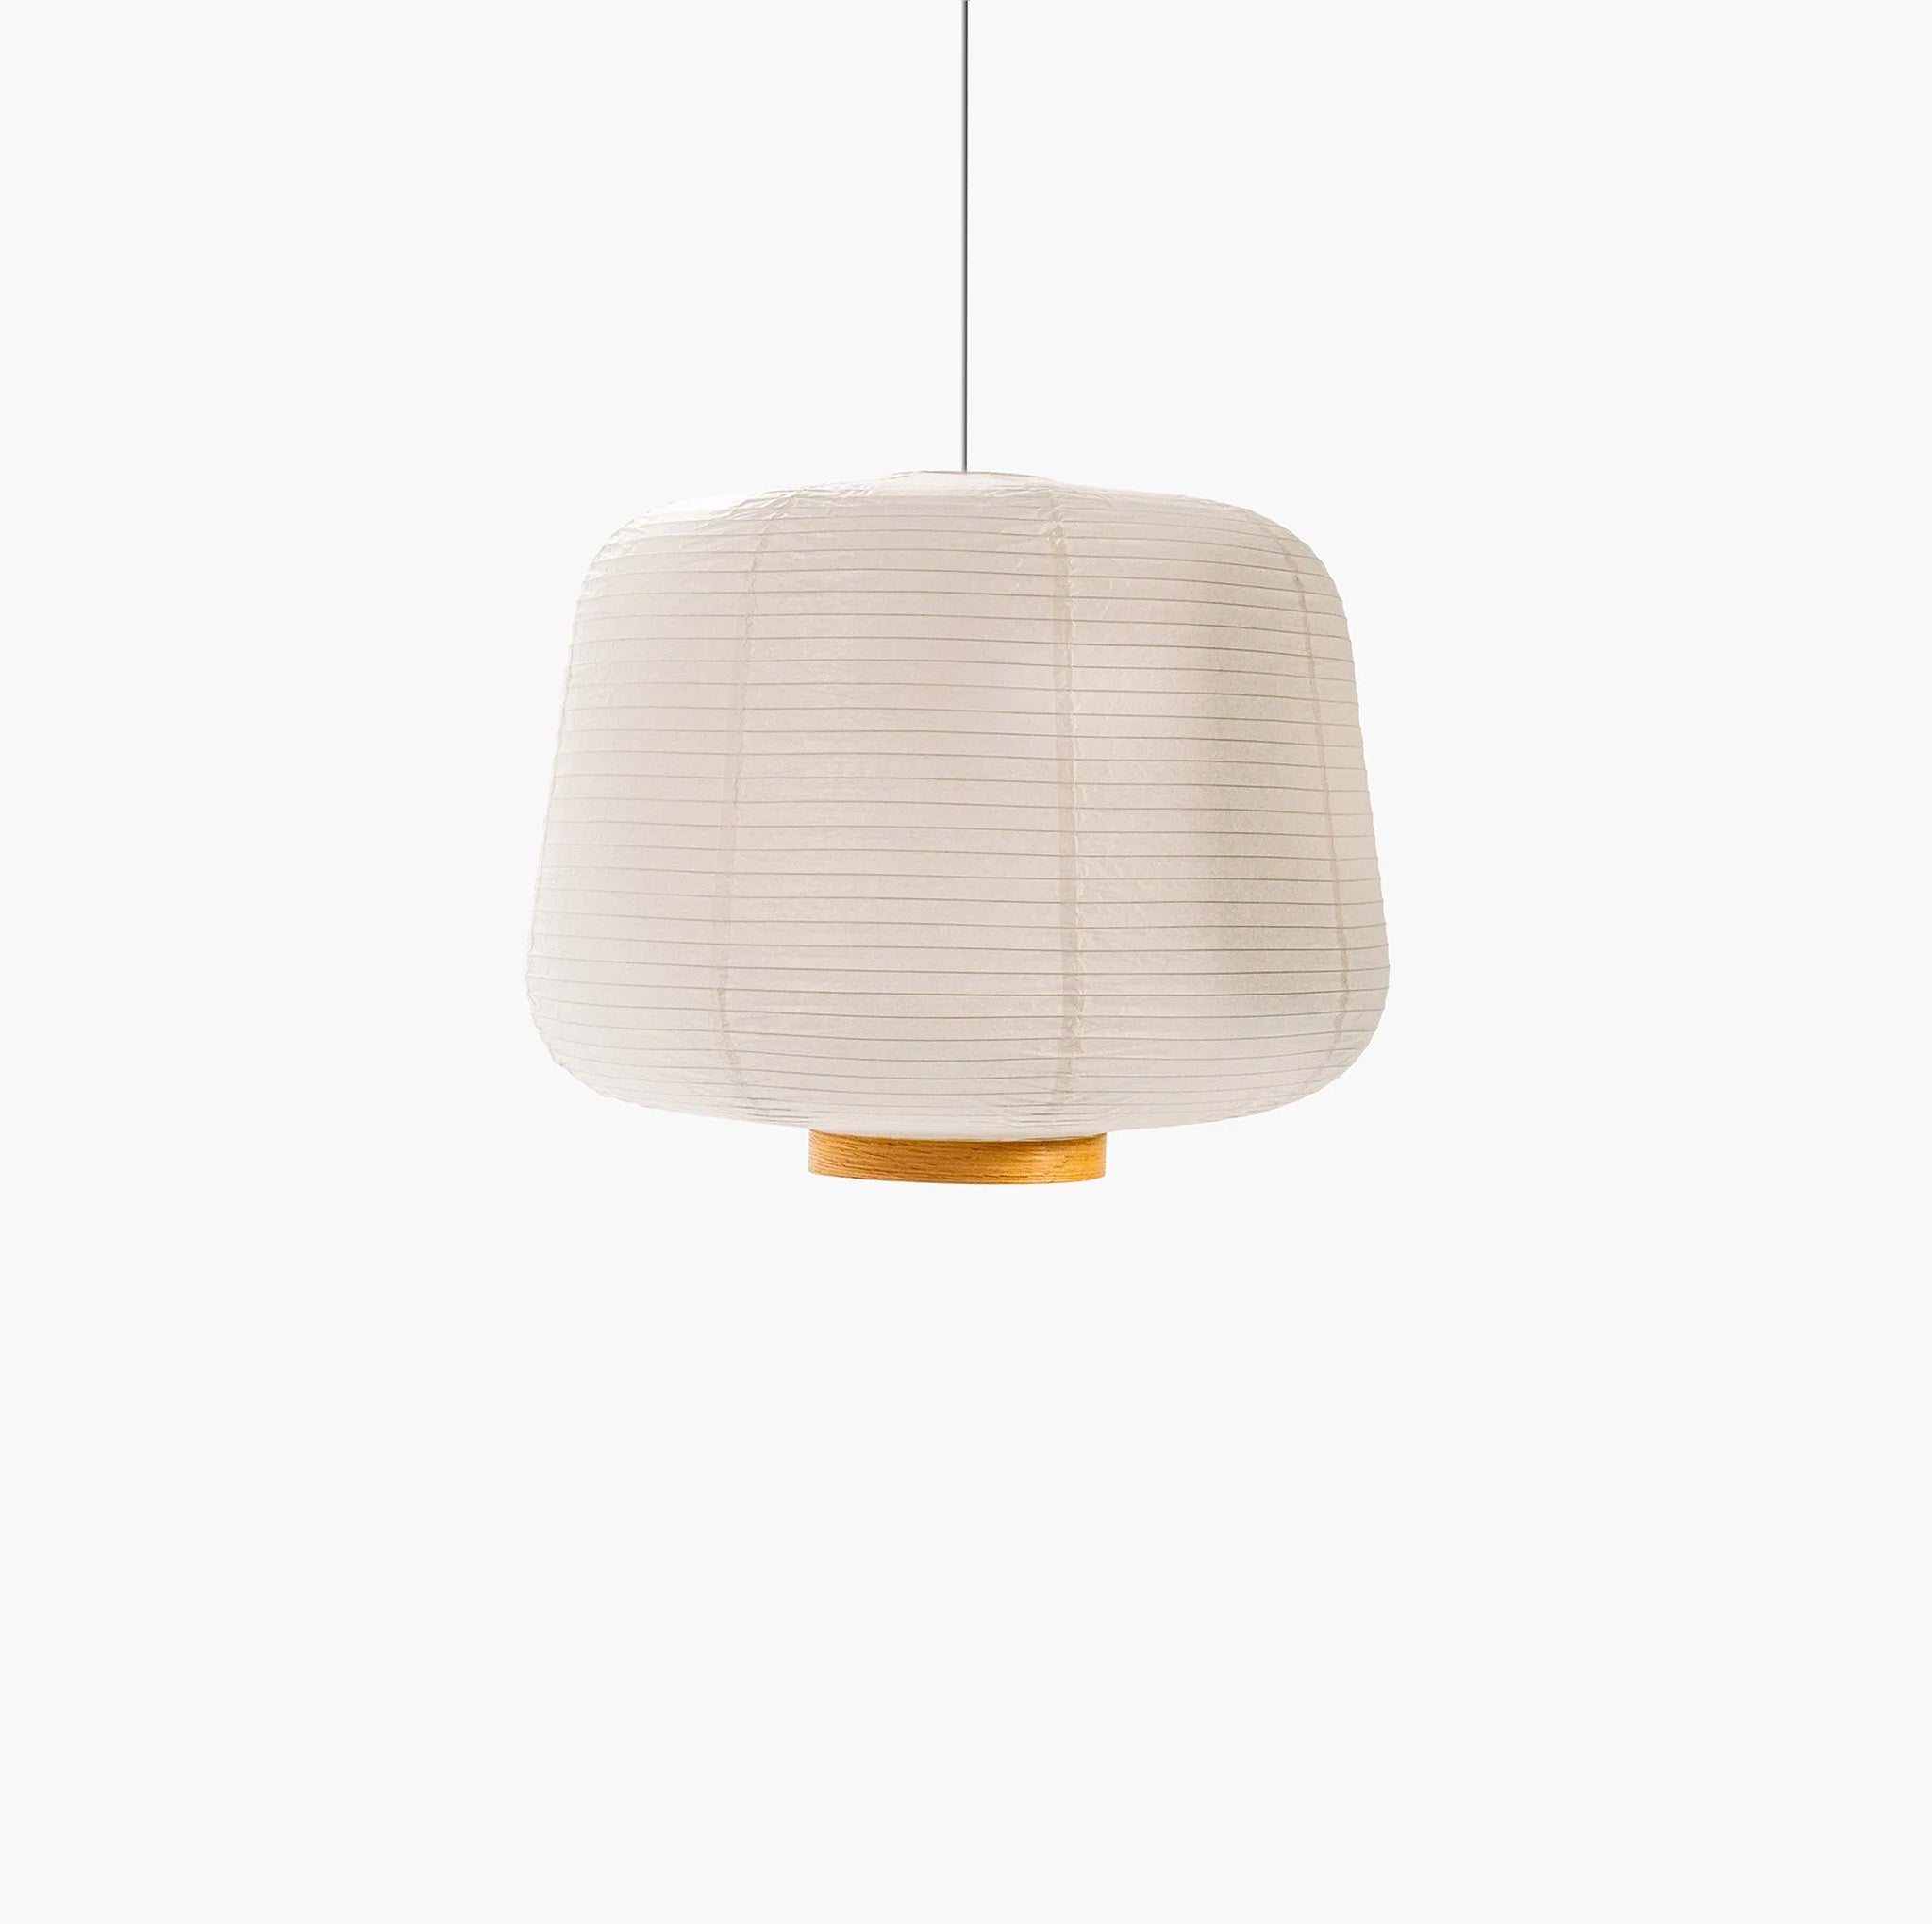 Soft Paper Pendant by Terence Woodgate